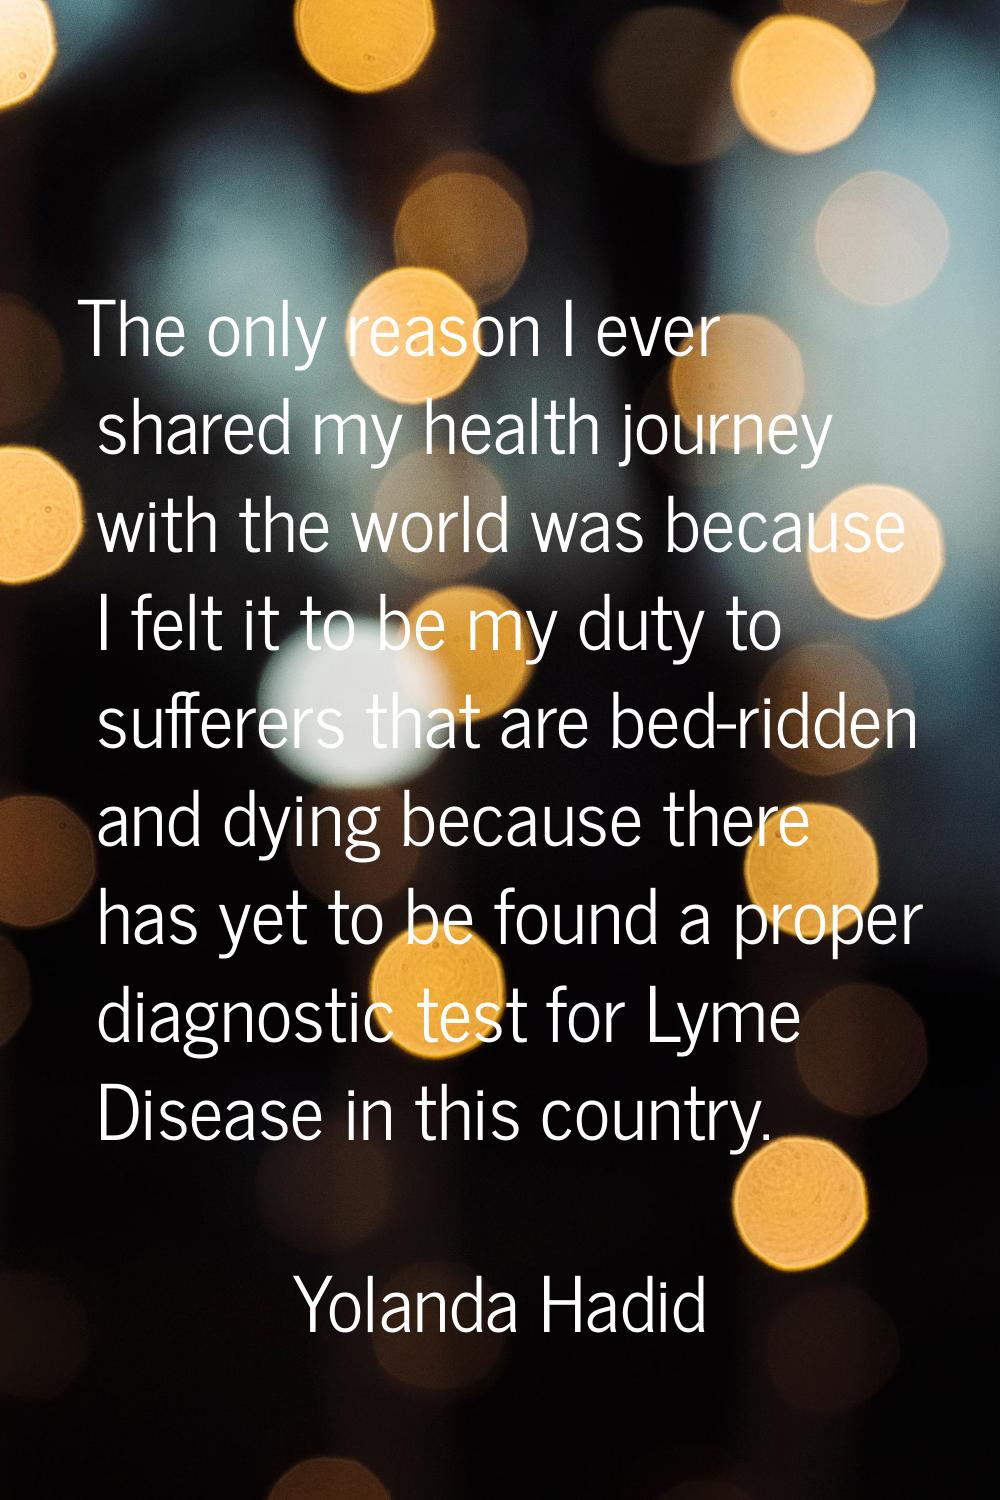 The only reason I ever shared my health journey with the world was because I felt it to be my duty 